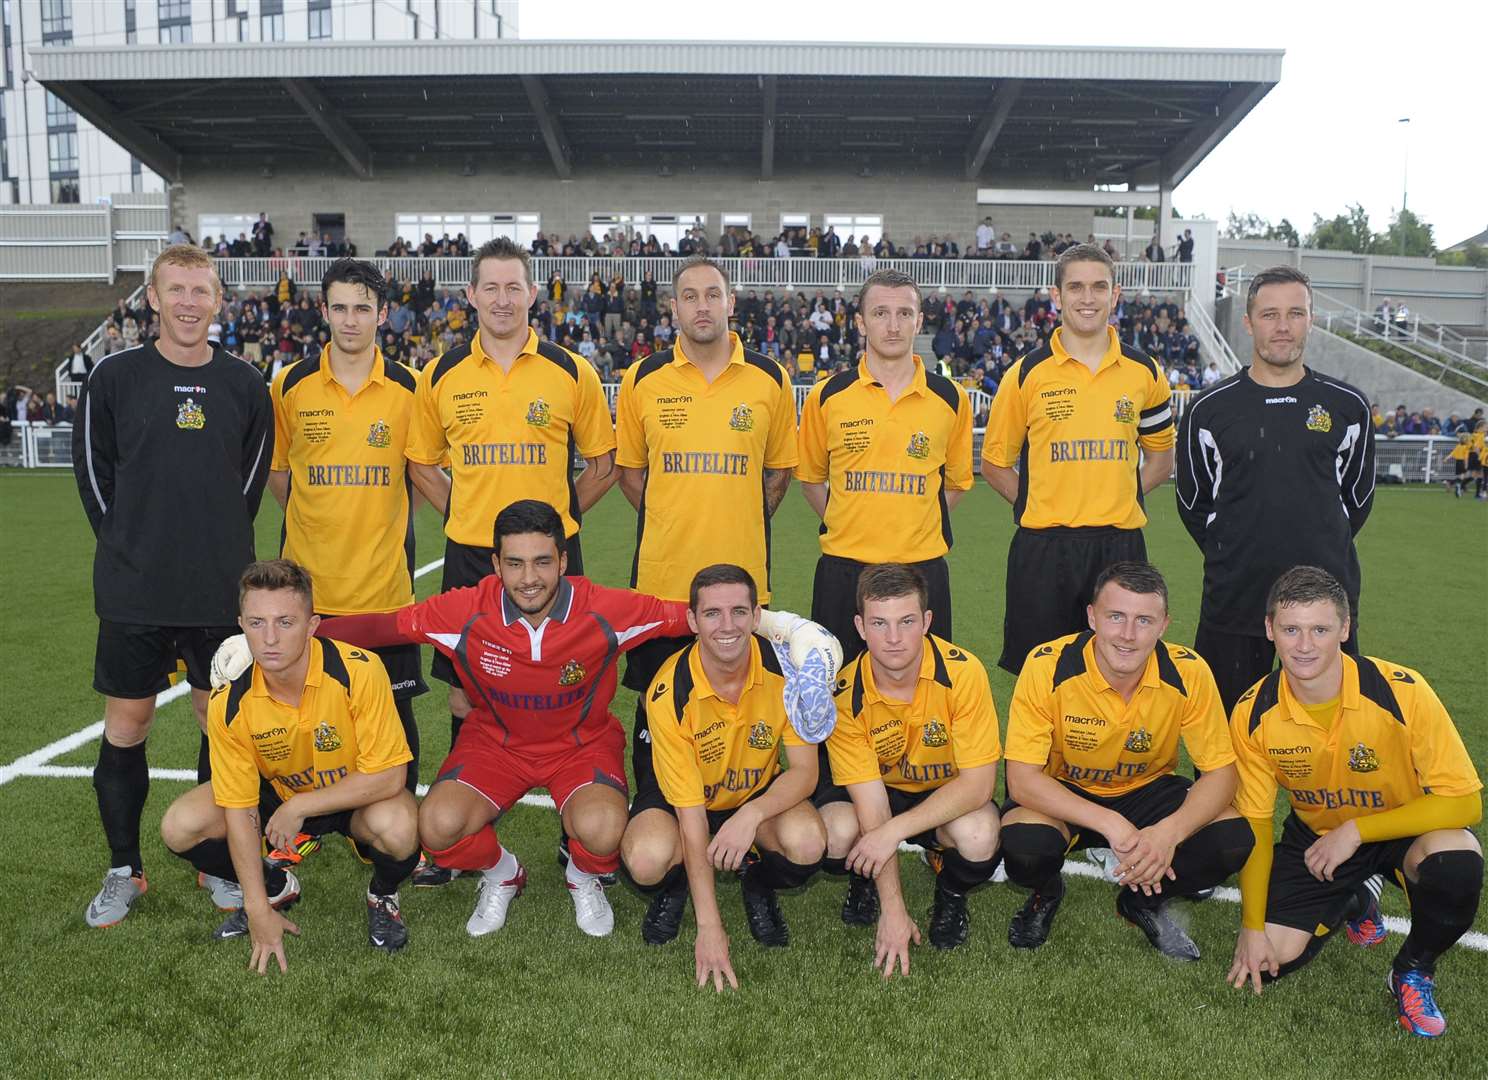 Maidstone line up before the opening game at the Gallagher Stadium, a friendly against Brighton & Hove Albion on July 14 2012 Picture: Ady Kerry